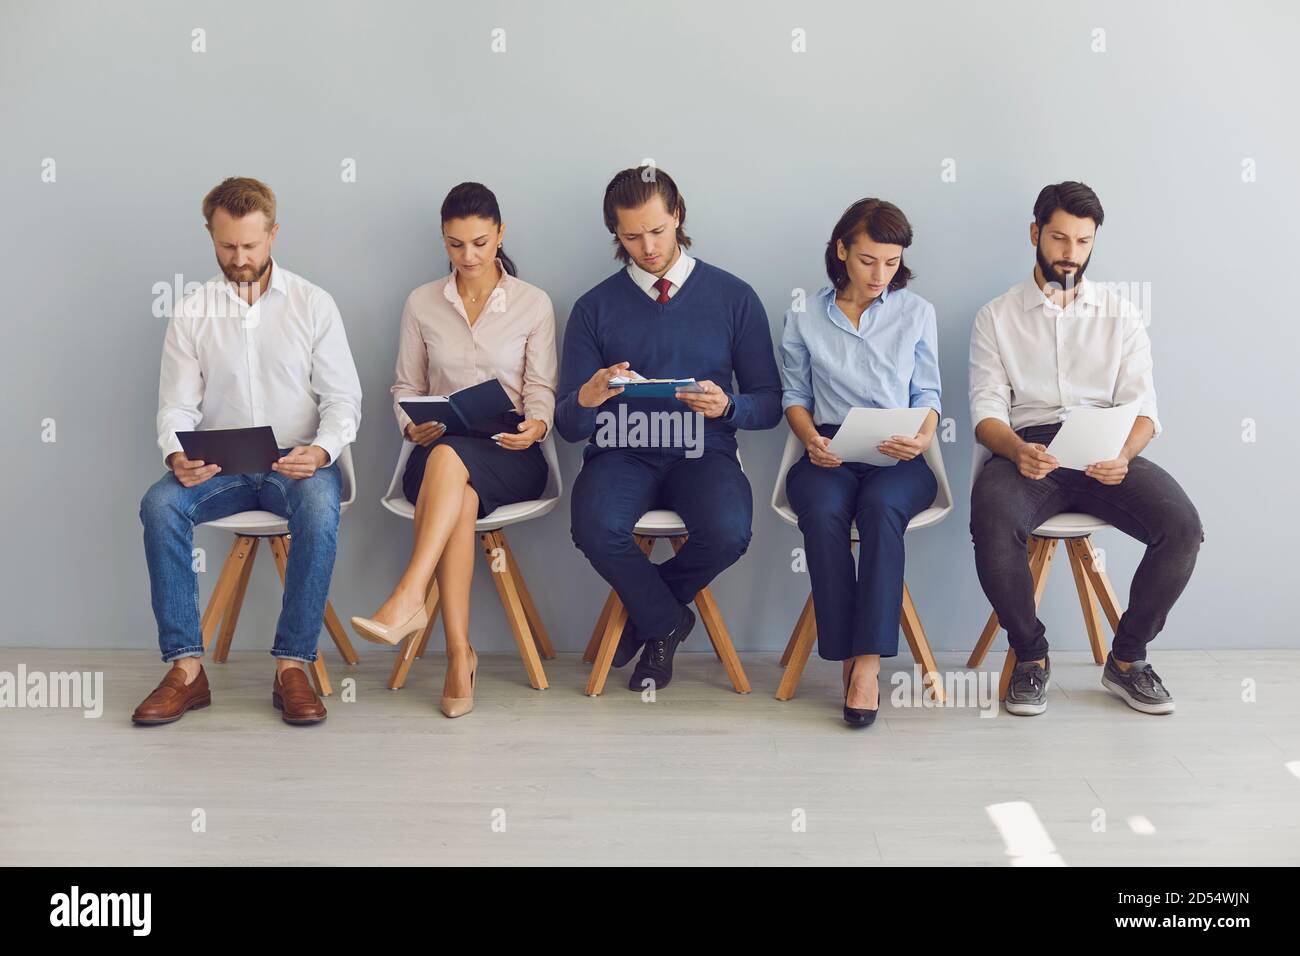 Job seekers with resumes in hands waiting for job interview sitting on chairs in a row Stock Photo